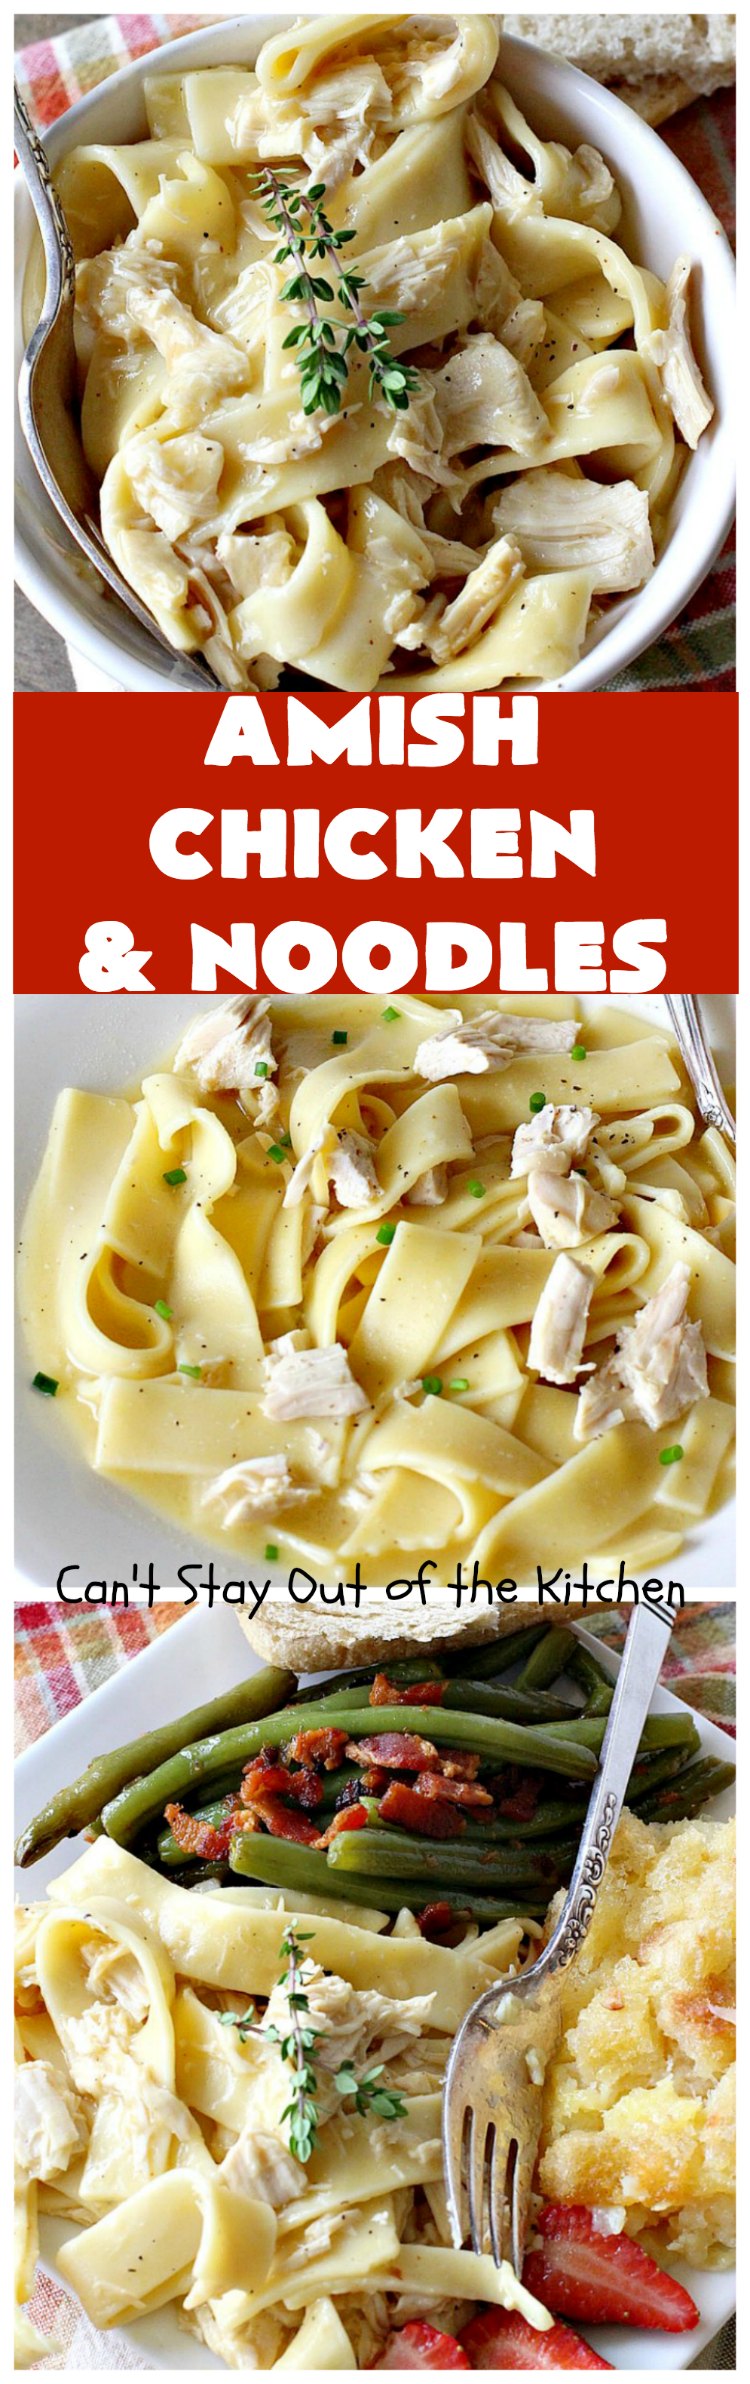 Amish Chicken and Noodles | Can't Stay Out of the Kitchen | this fantastic 30-minute recipe uses only 6 ingredients. It's so quick & easy for weeknight dinners. We've served it several times for company & everyone loved it! #Amish #chicken #noodles 